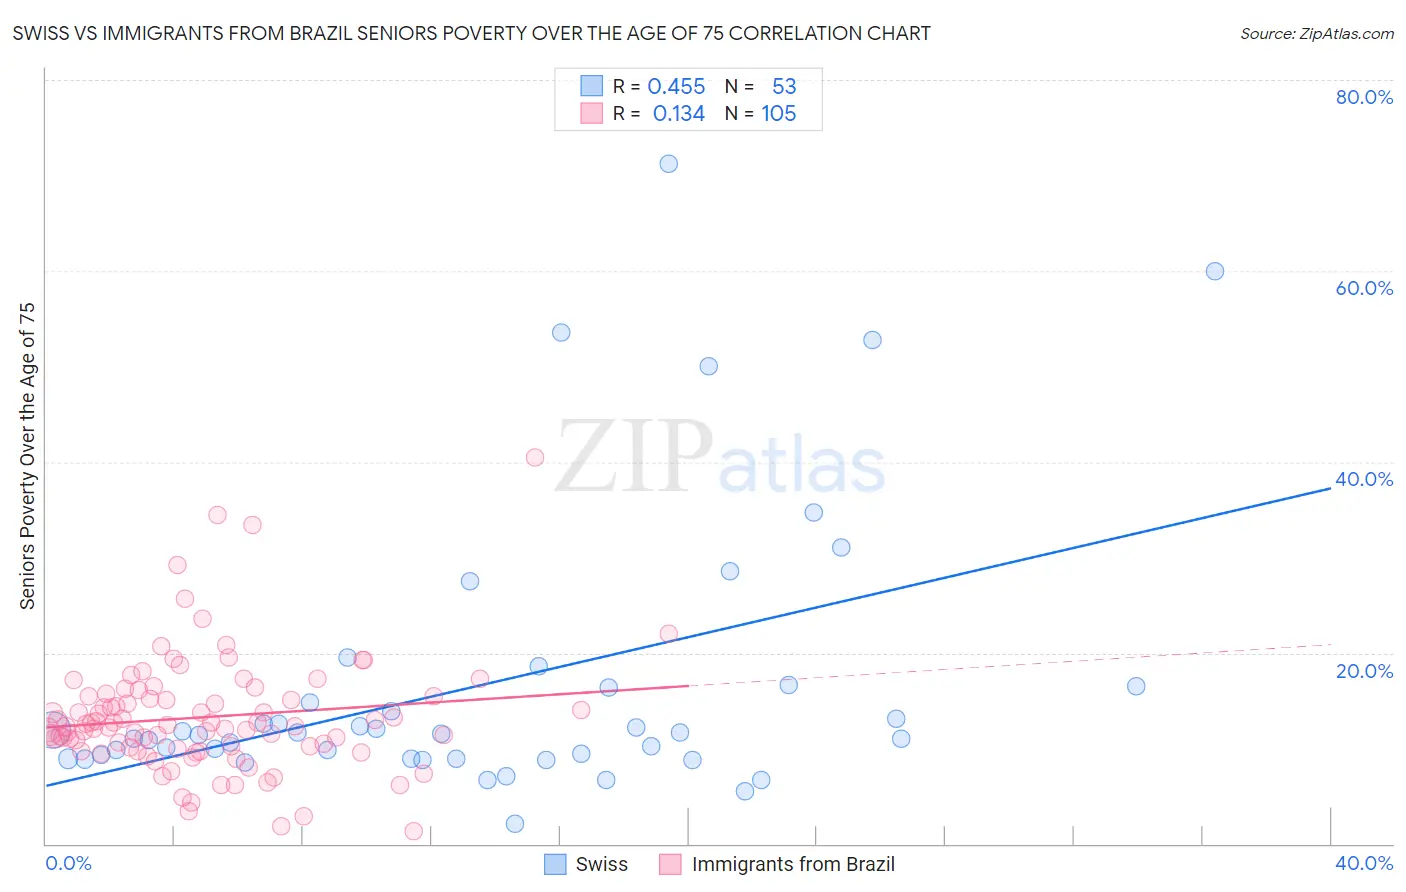 Swiss vs Immigrants from Brazil Seniors Poverty Over the Age of 75